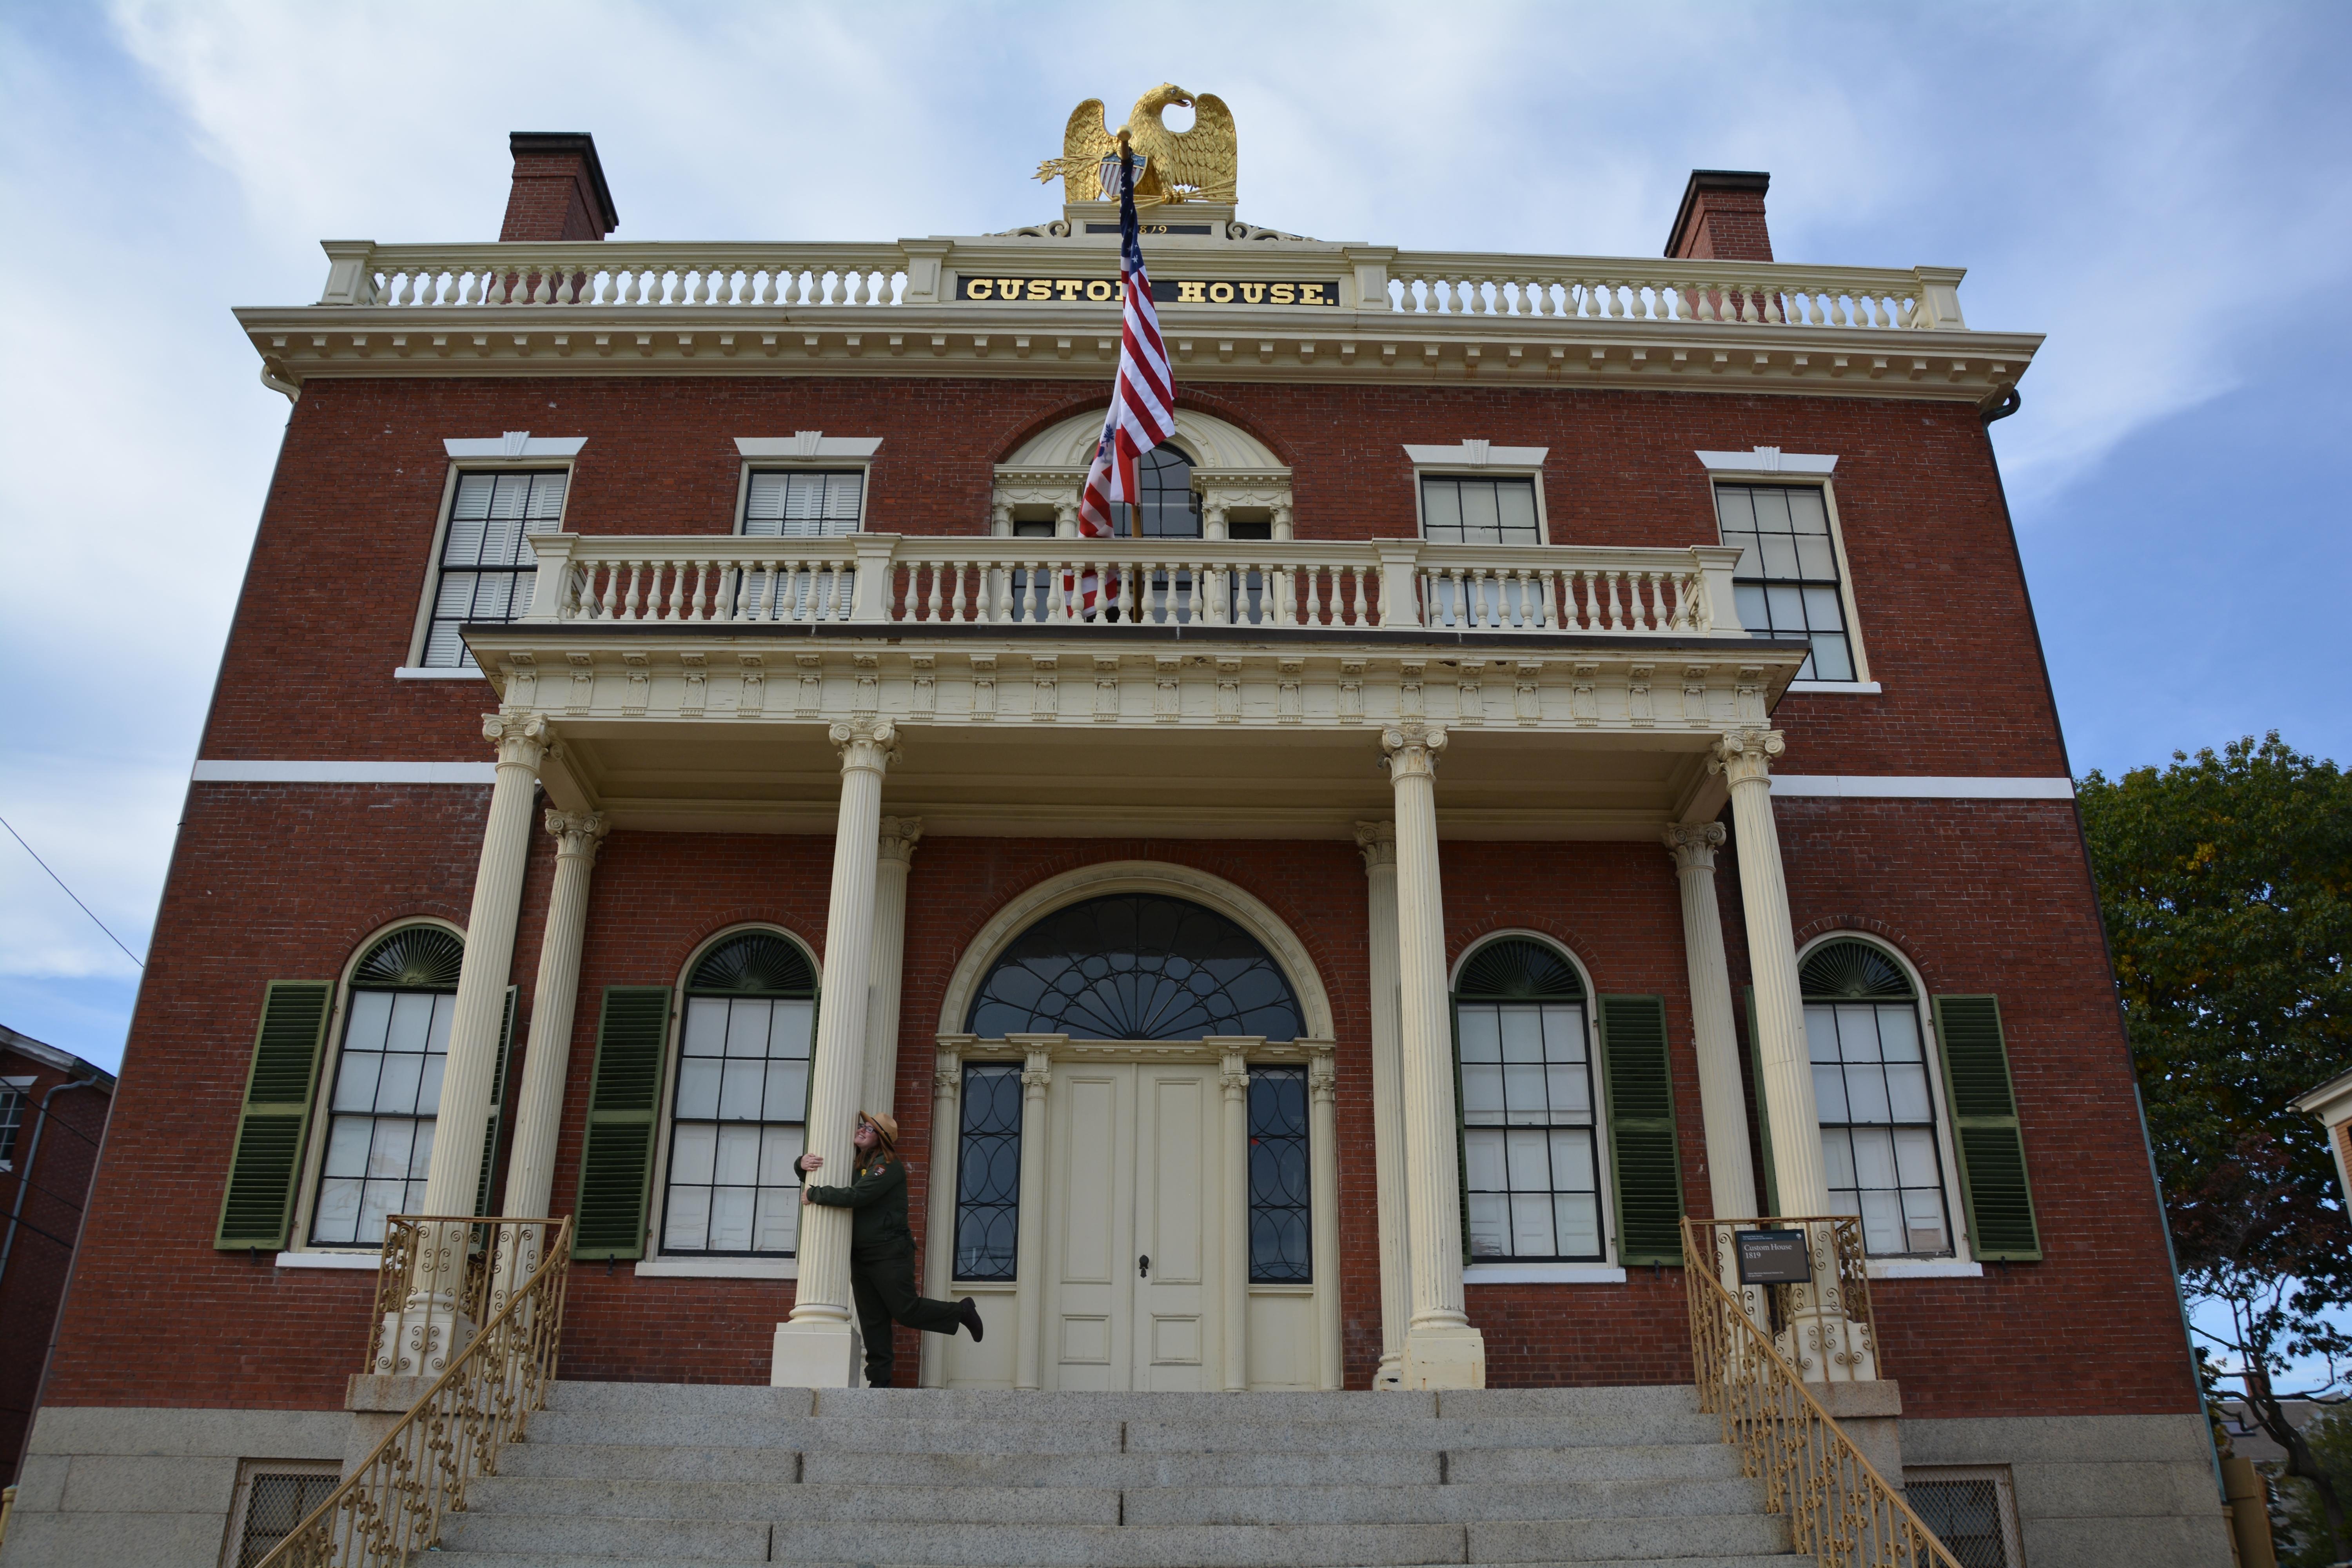 Three story red brick building with white columns has a wide staircase and golden eagle on top.